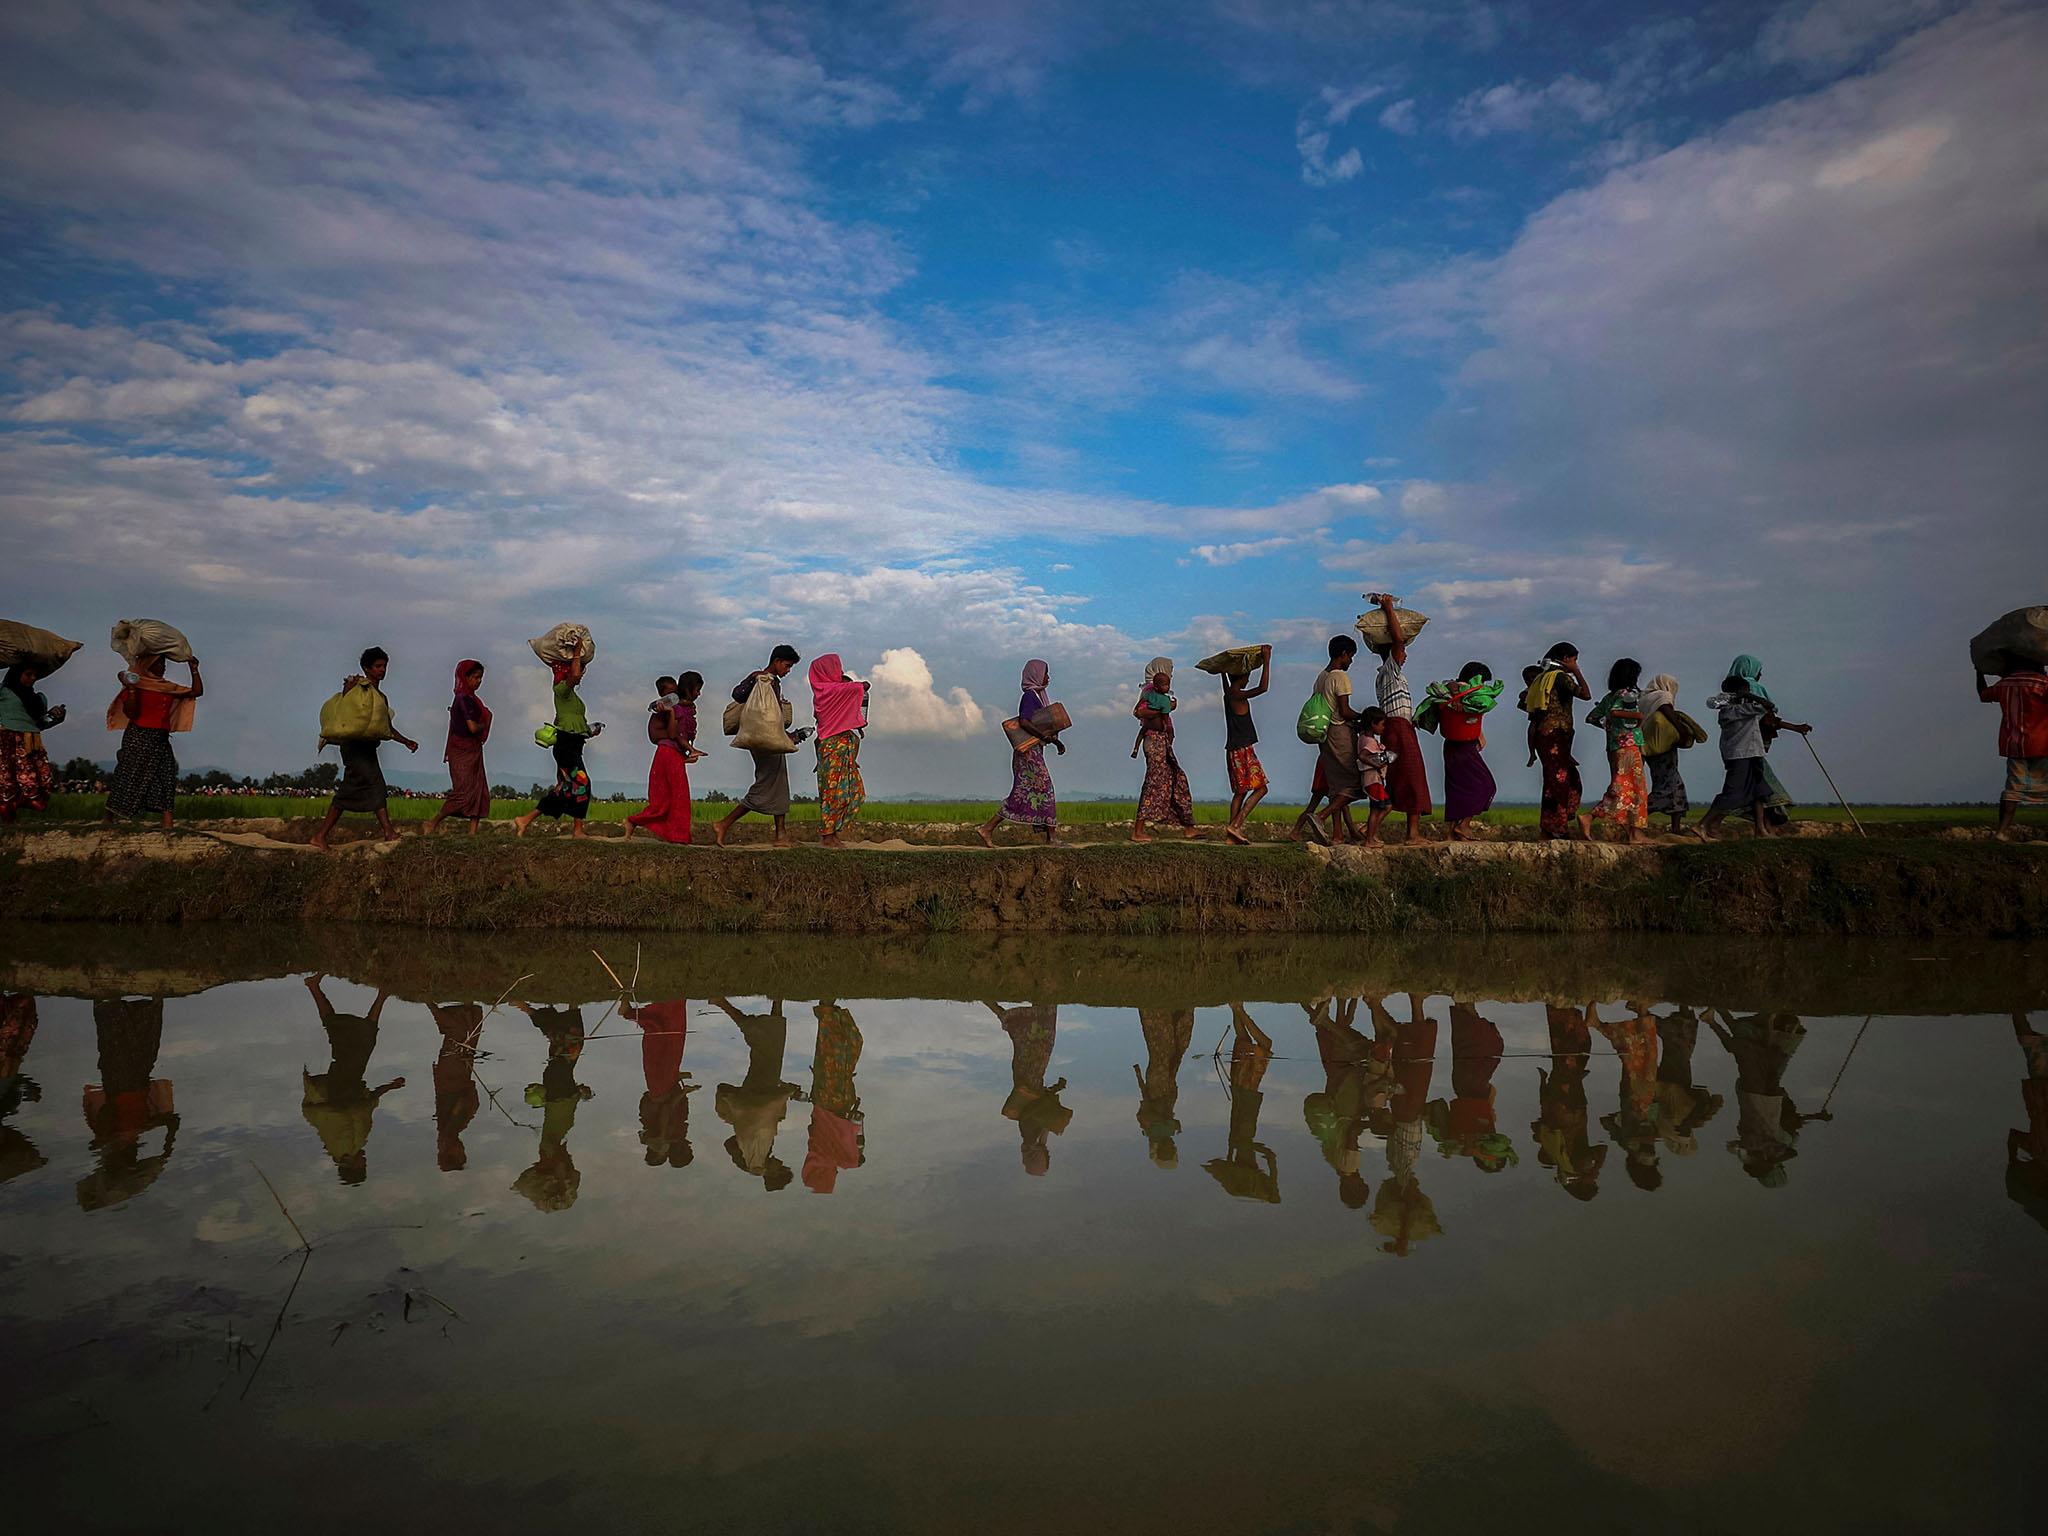 Rohingya refugees are reflected in rain water along an embankment next to paddy fields after fleeing from Myanmar into Palang Khali, near Cox's Bazar, Bangladesh